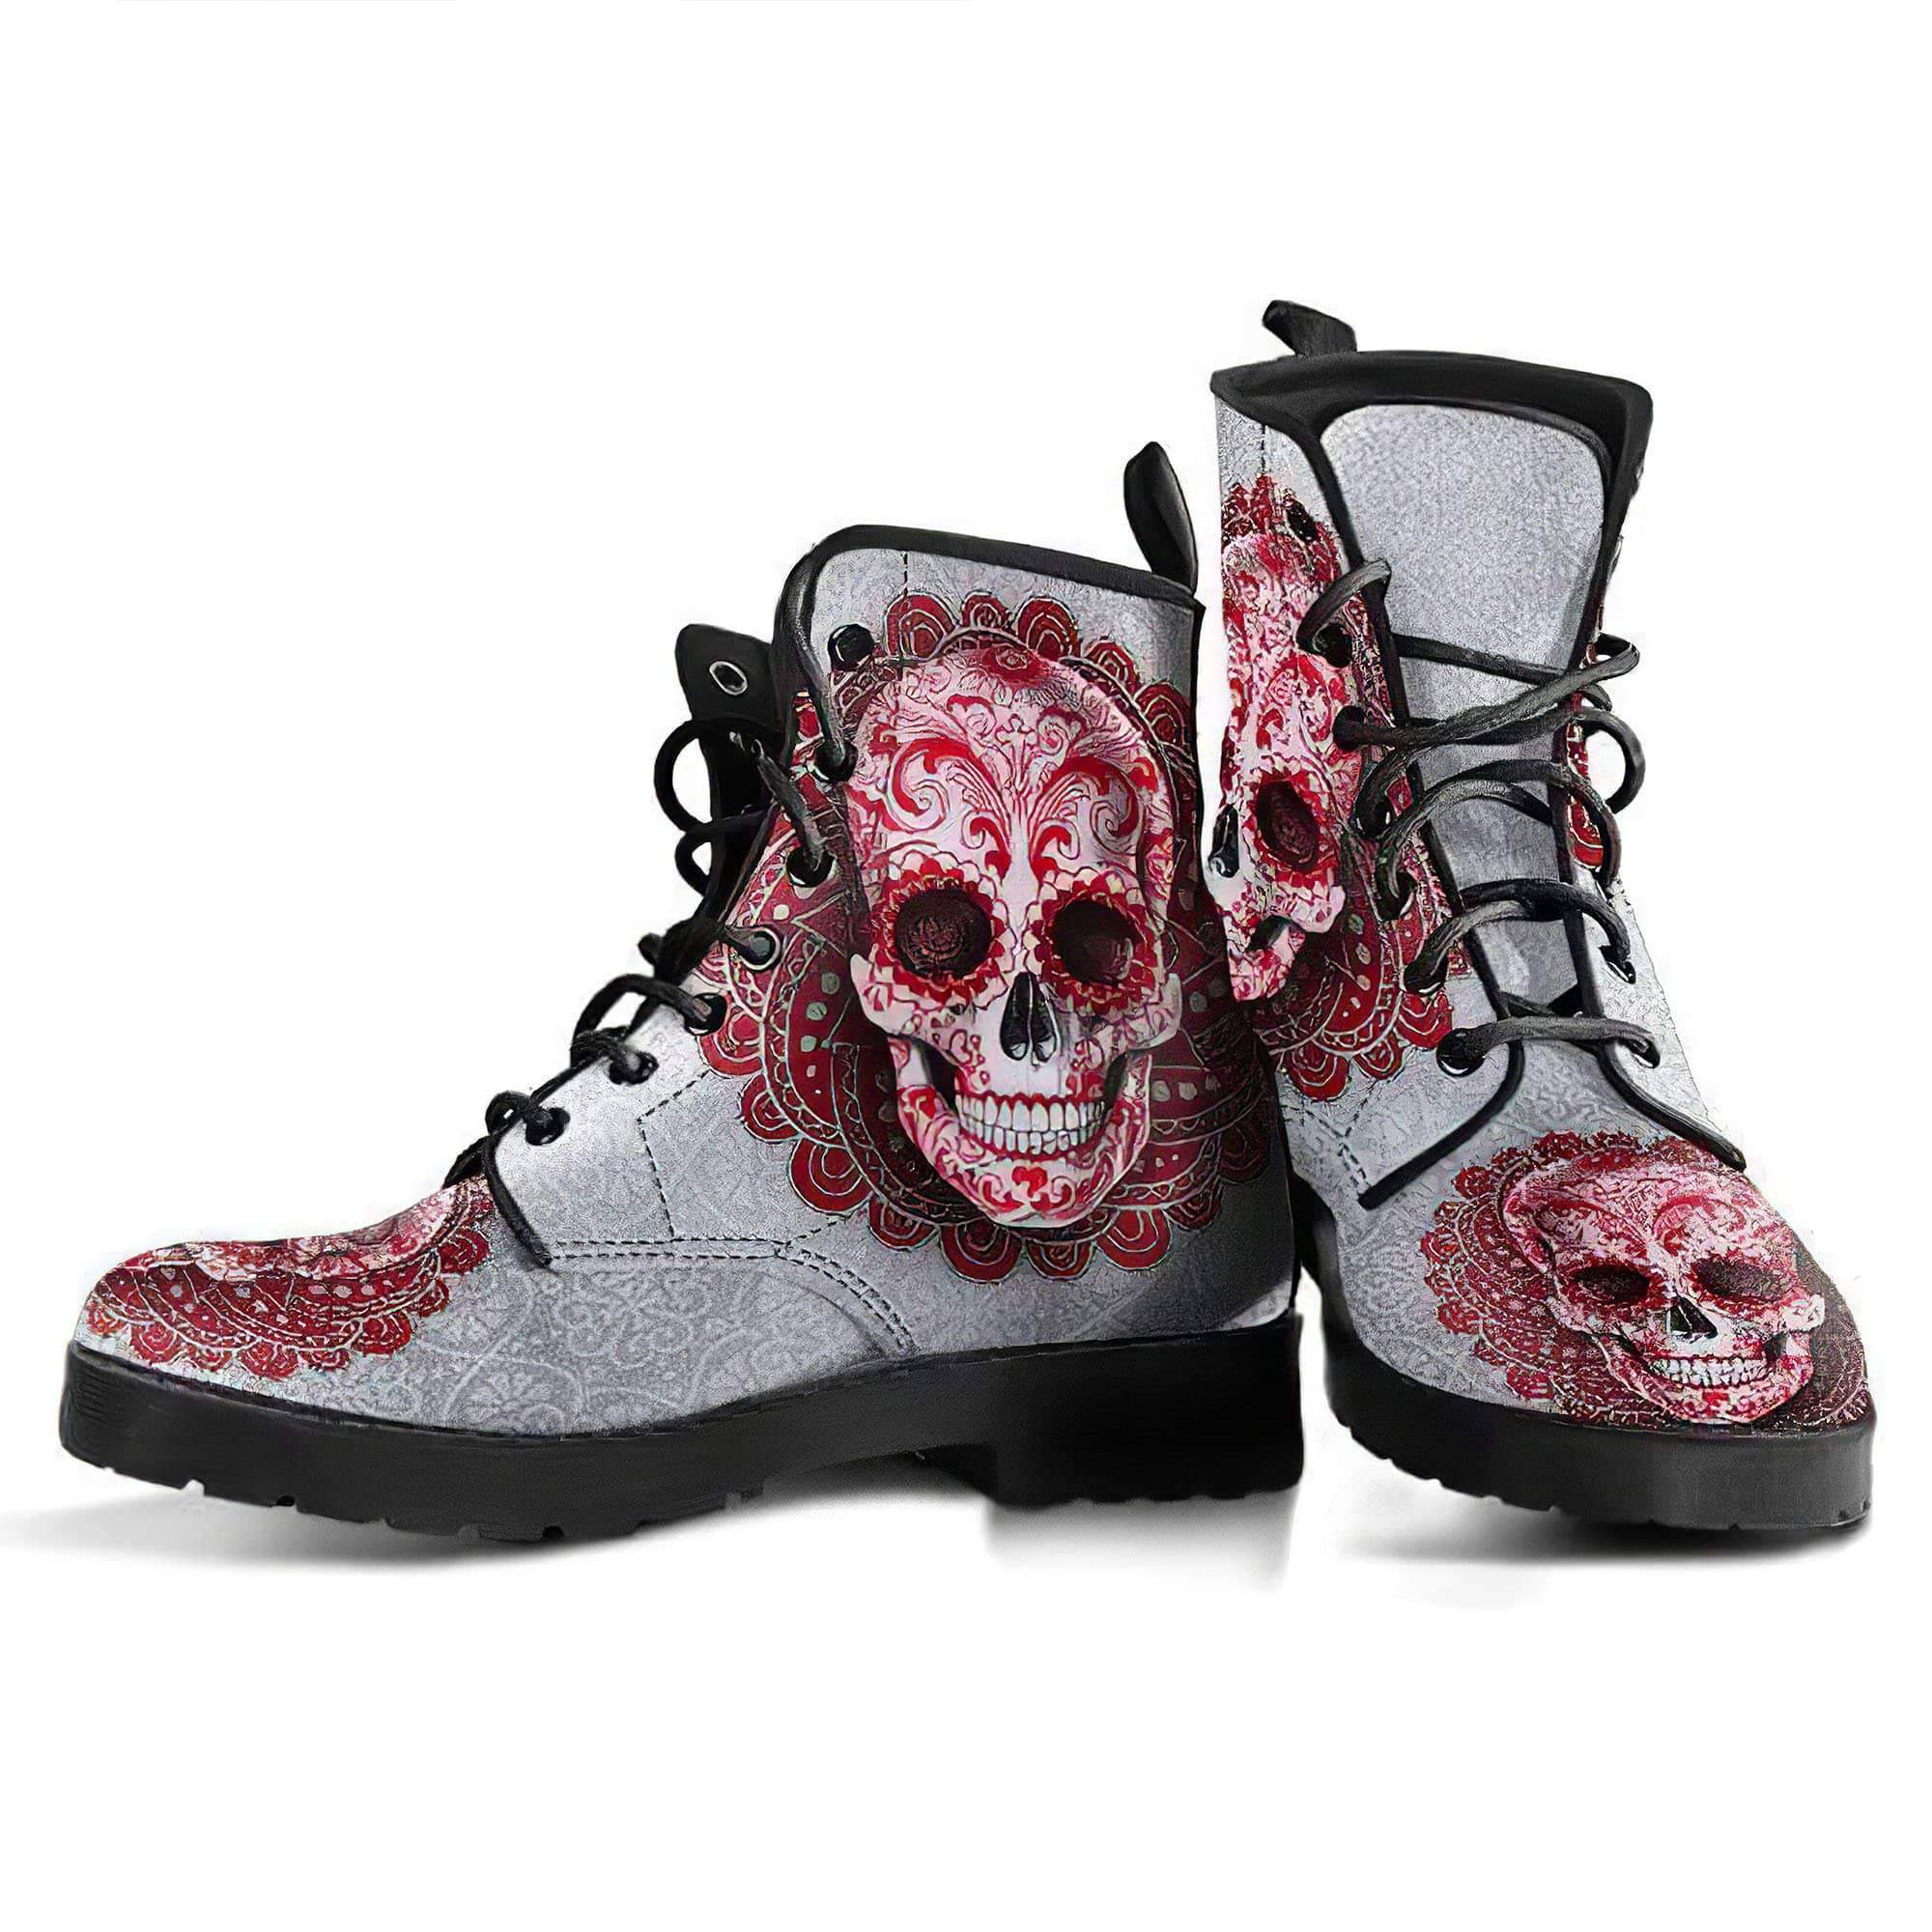 red-skull-women-s-leather-boots-women-s-leather-boots-12051944734781.jpg